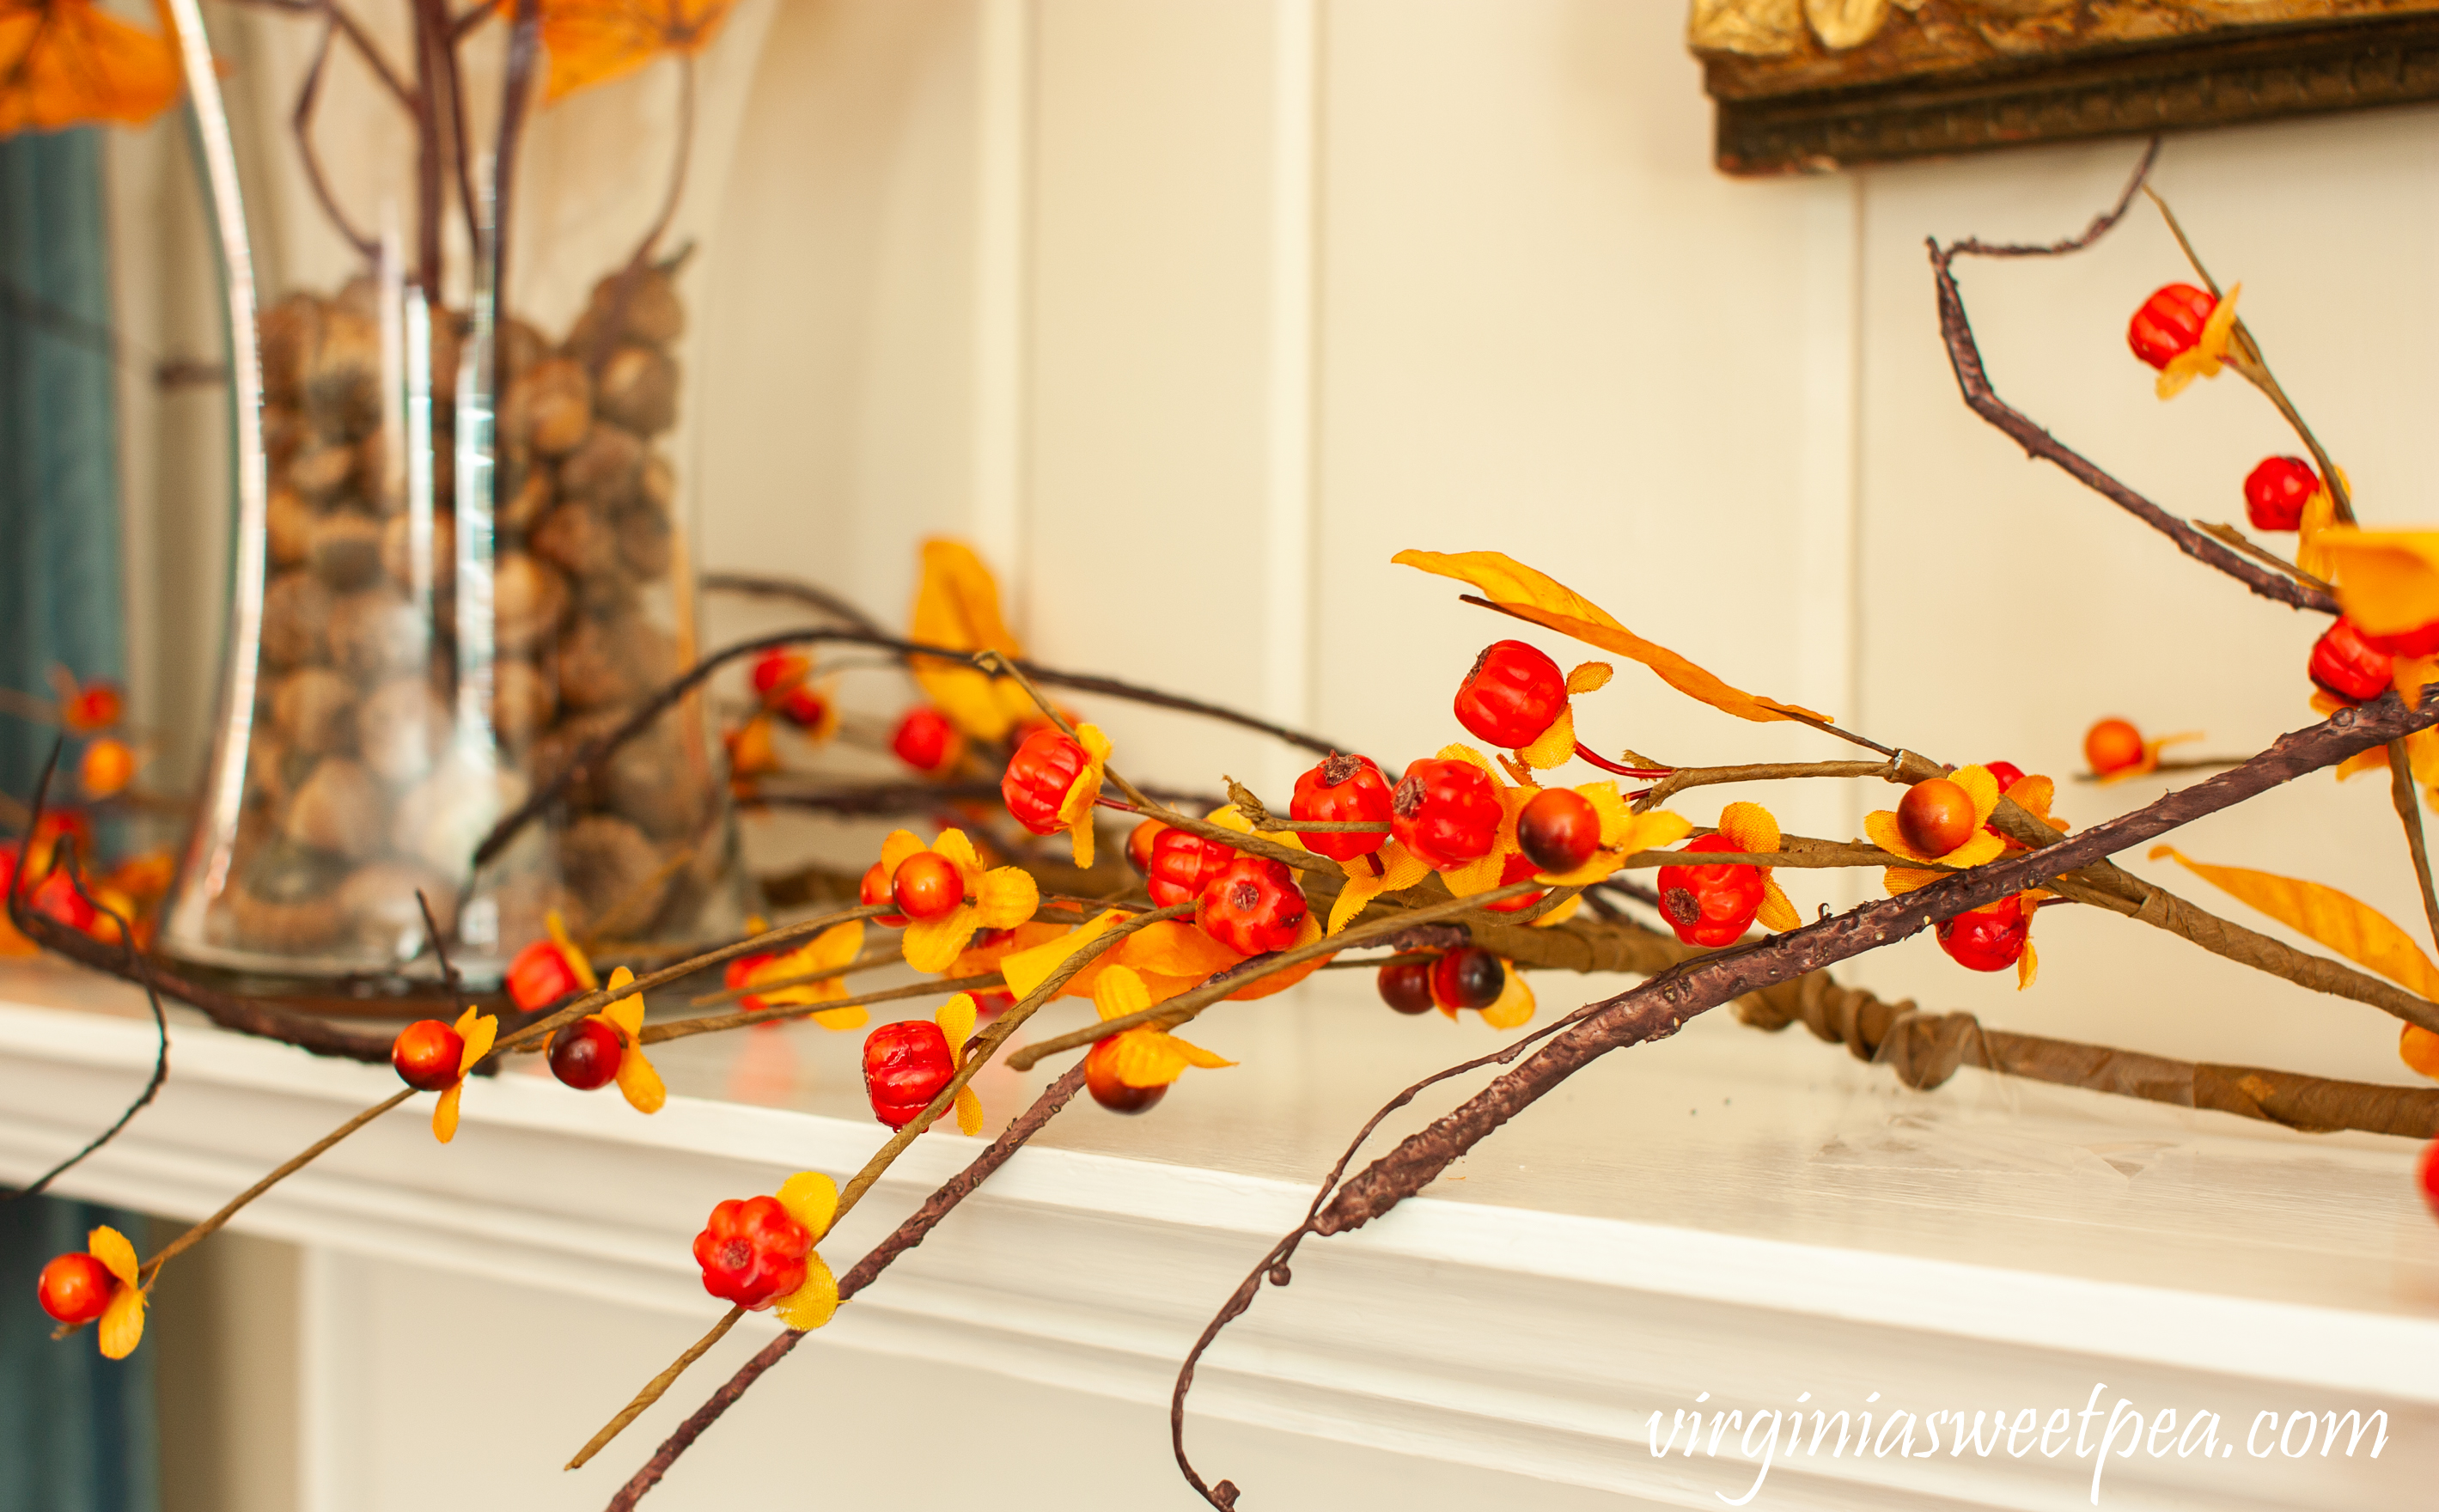 Bittersweet used to decorate a mantel for fall.